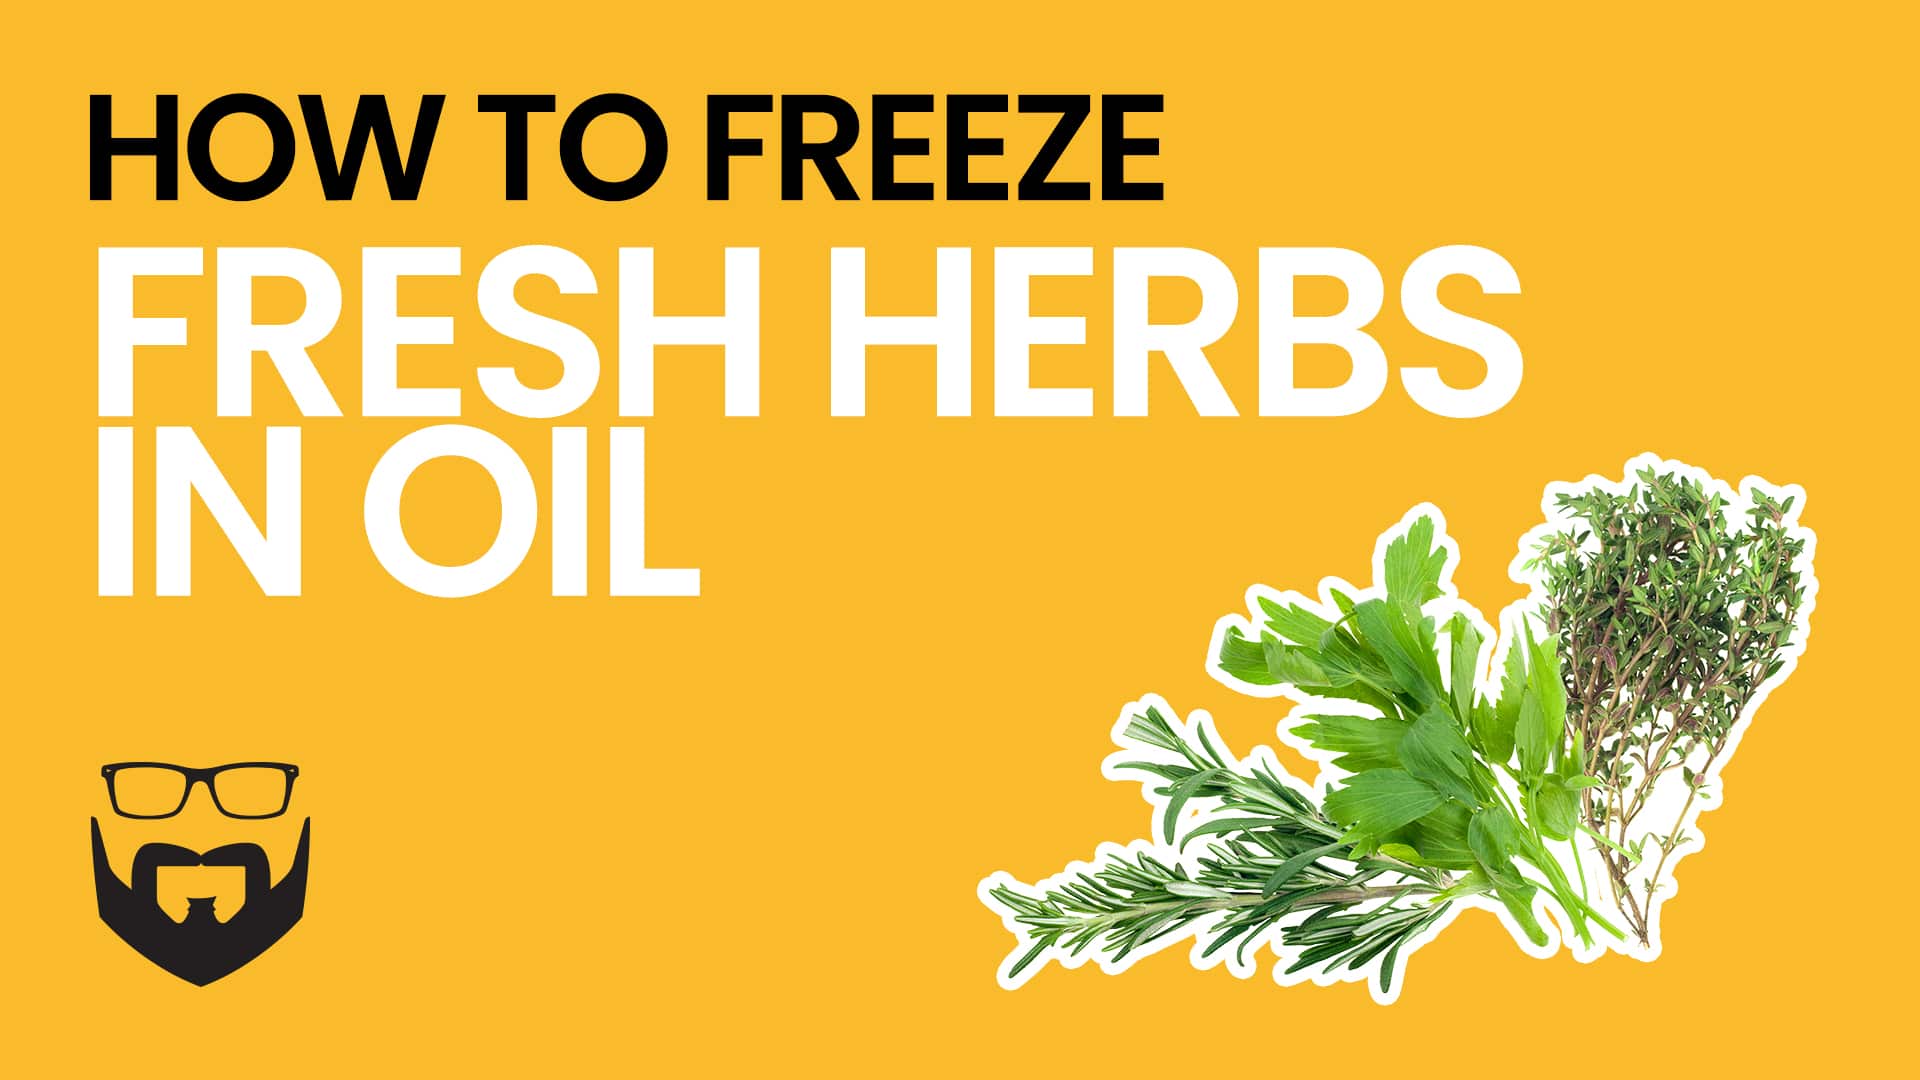 How to Freeze Fresh Herbs in Oil Video - Yellow